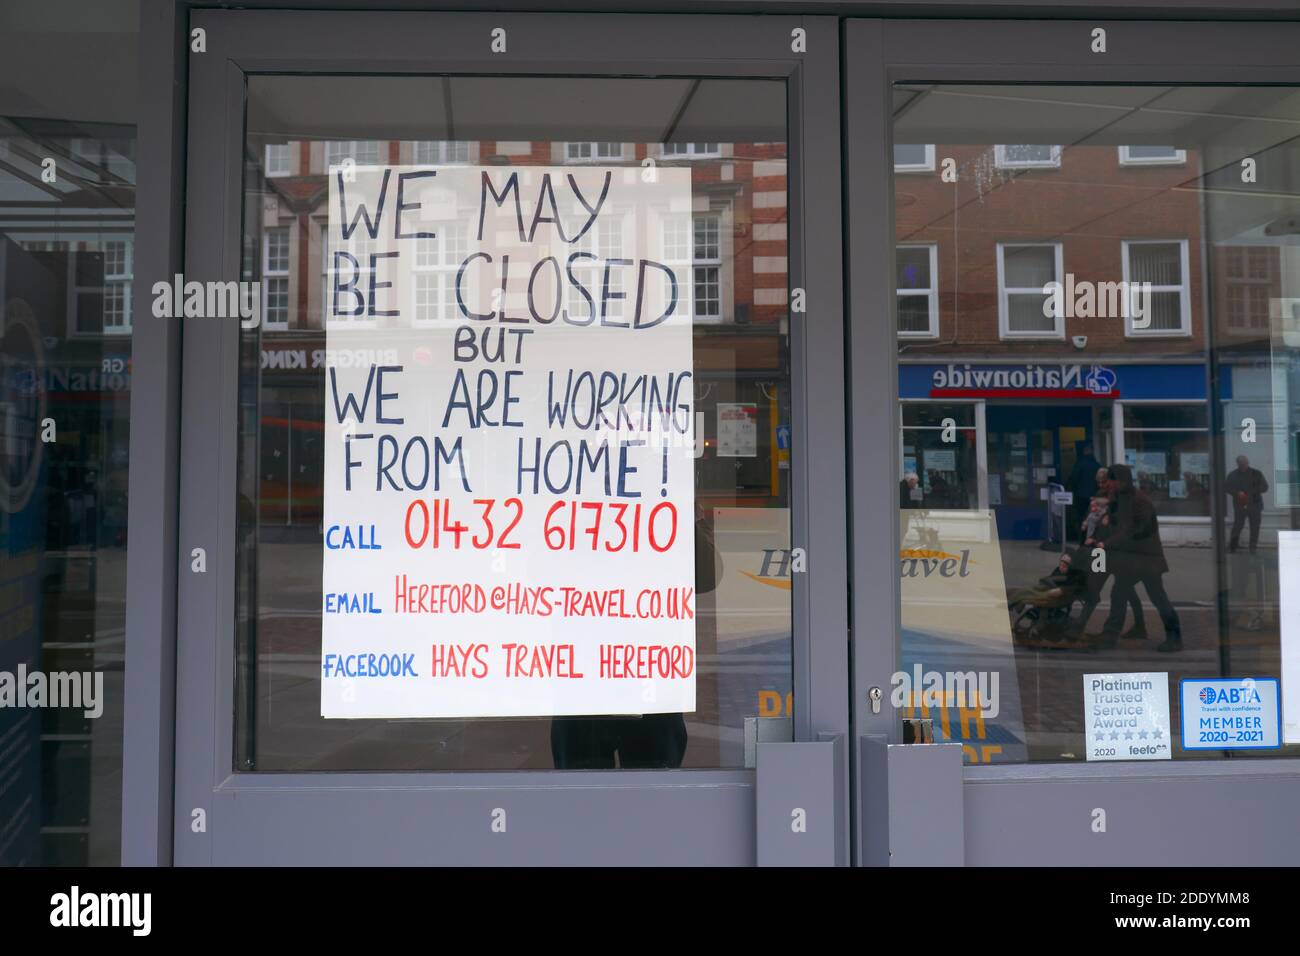 Coronavirus lockdown 2 - a branch of Hays travel agents closed as non essential with sign informing public that staff are working from home - Nov 2020 Stock Photo